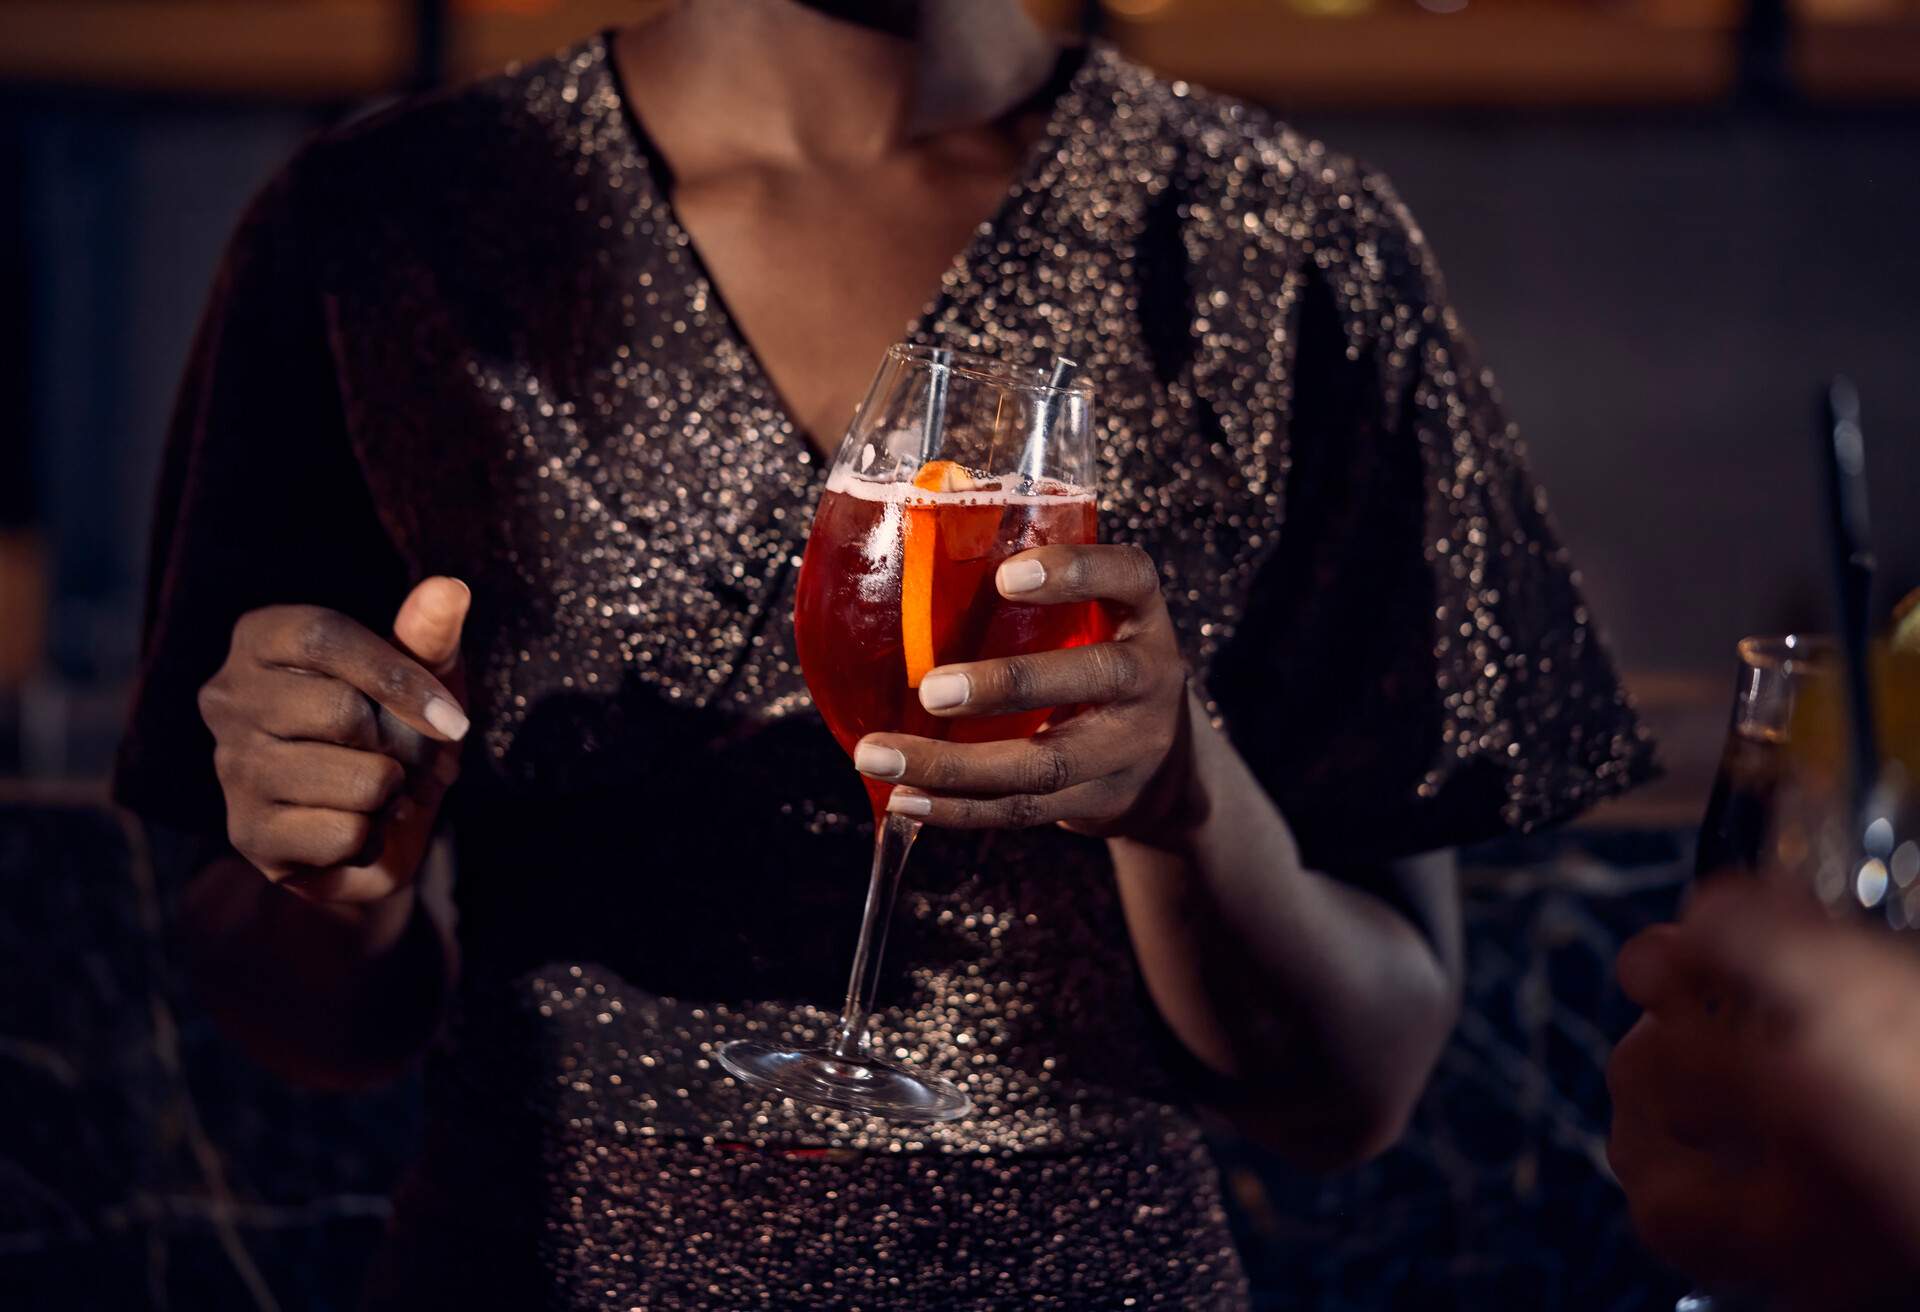 Close-up of a person in a sparkly dress and holding a drink.